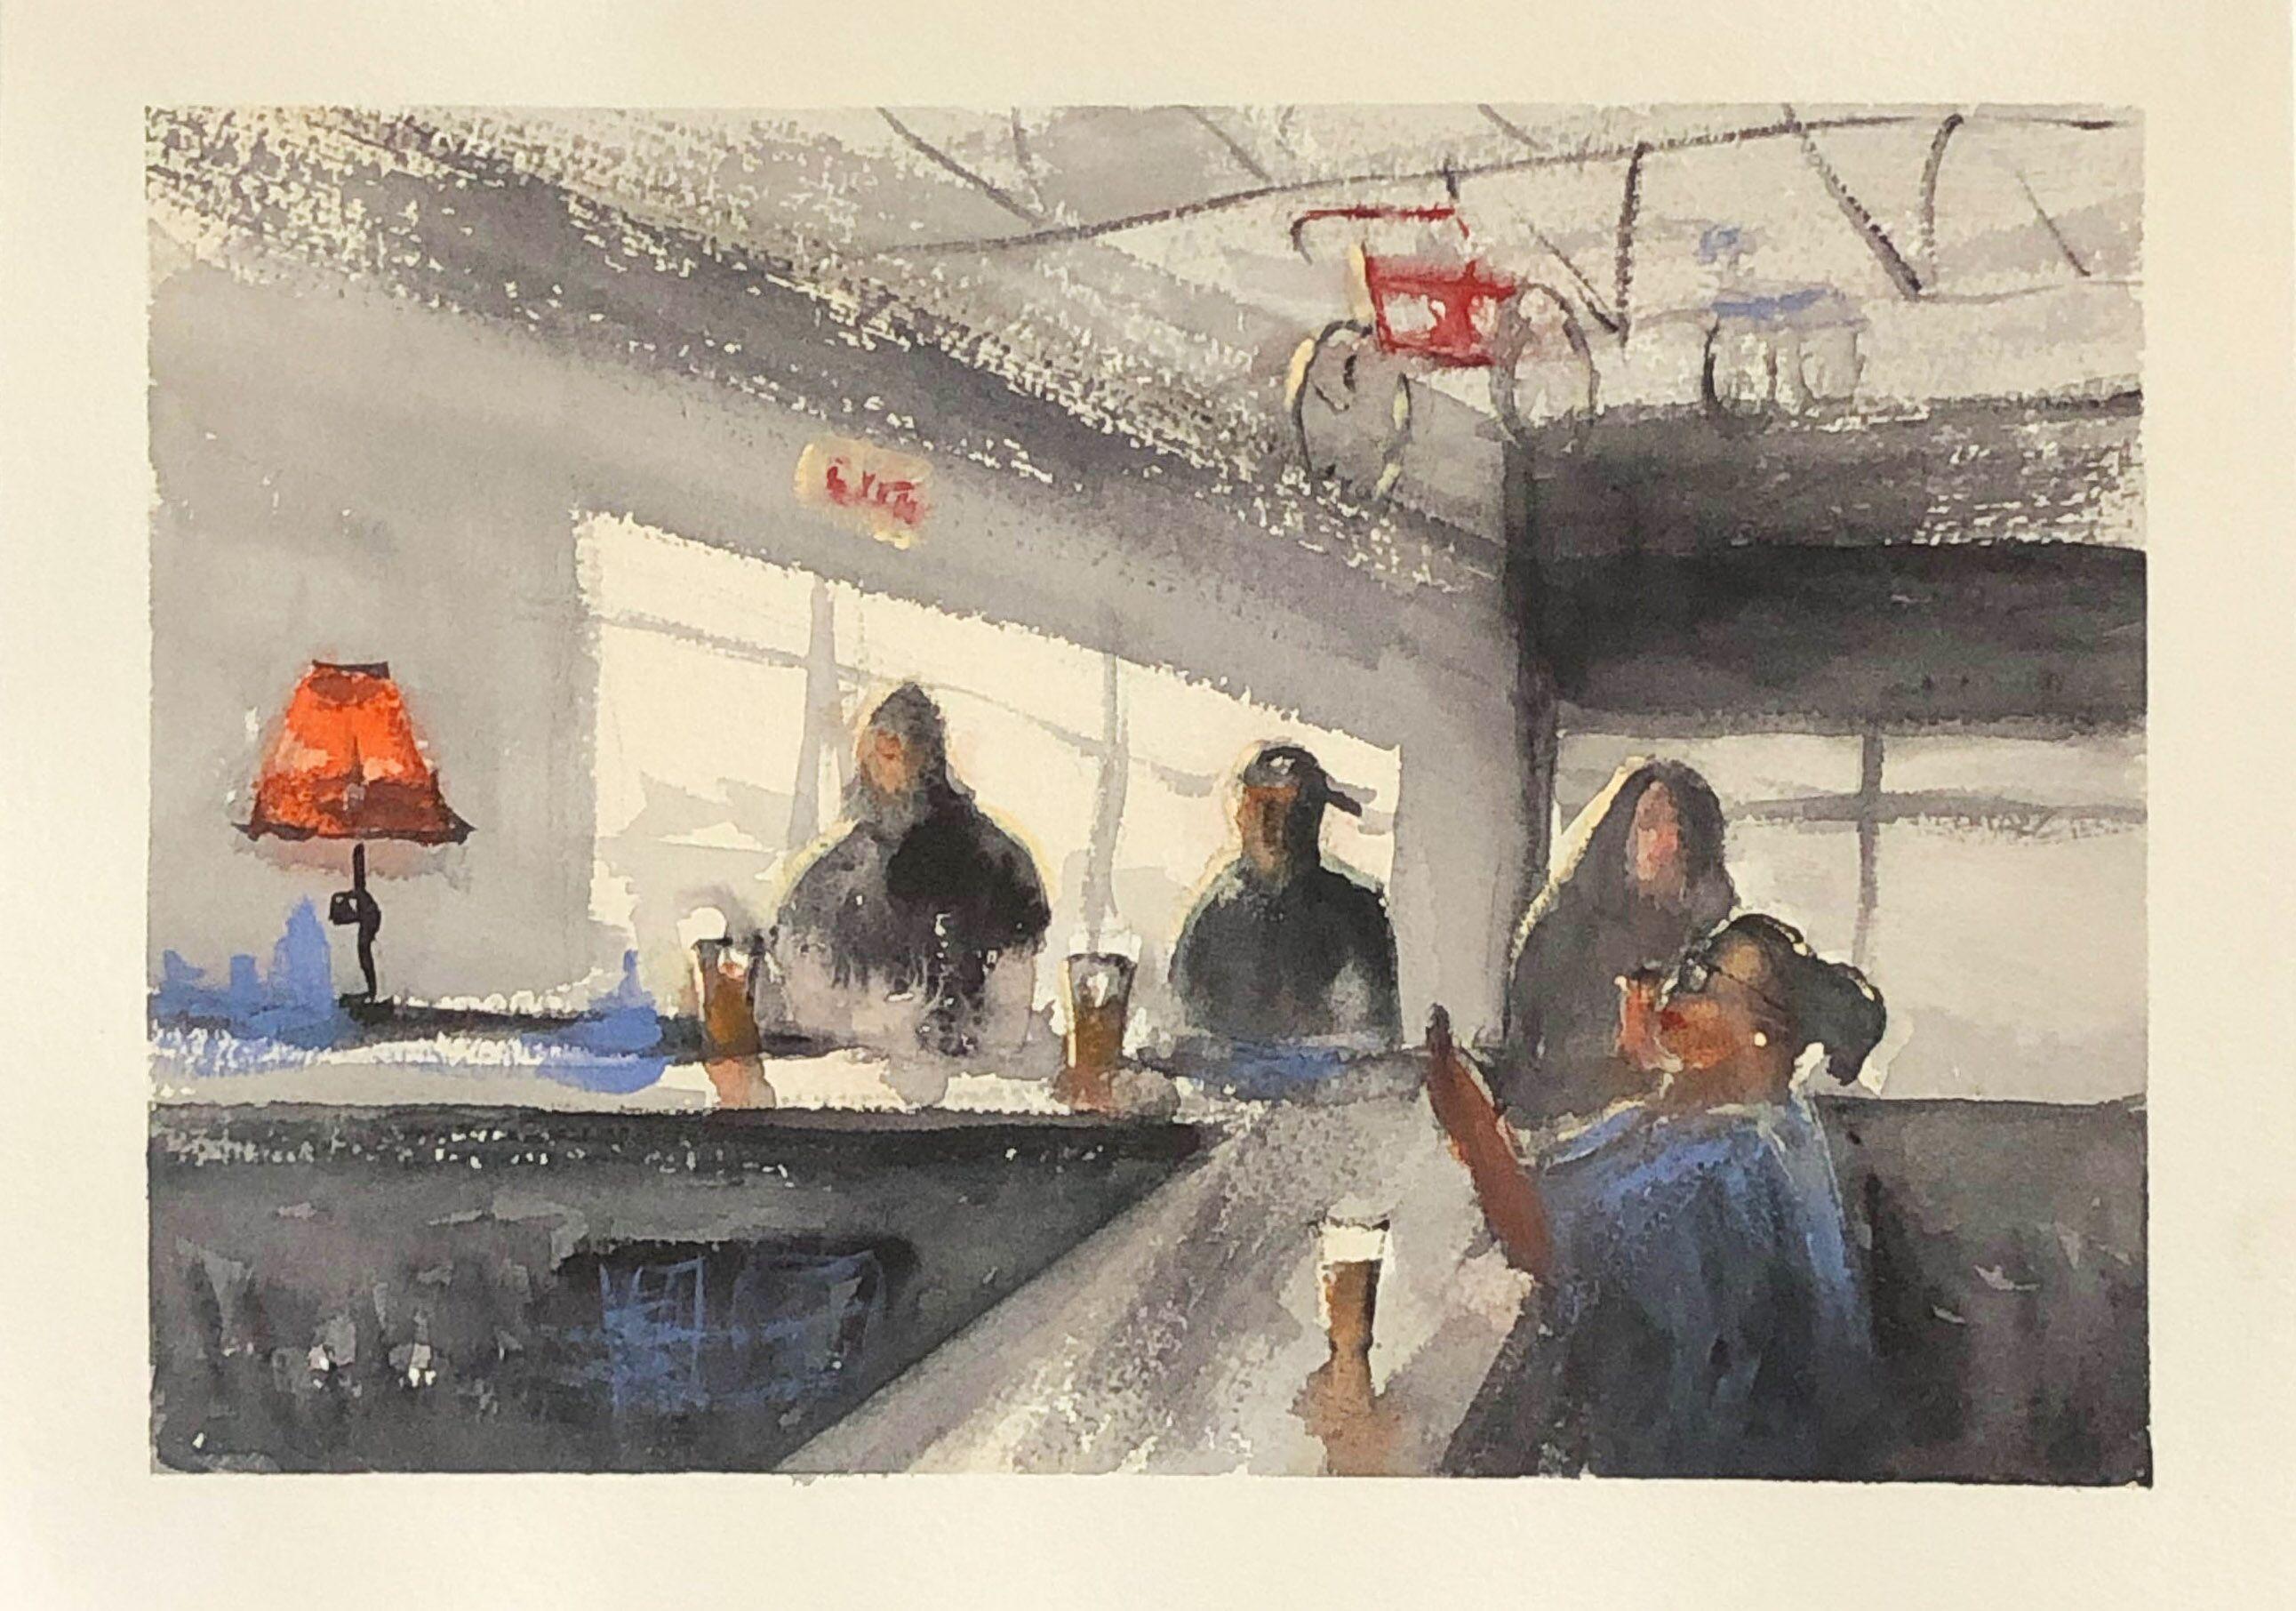 "Wausau Wednesday Night" is an original watercolor by Julia Taylor. The watercolor is a bar interior in Wausau, Wisconsin. Four individuals sit around the bar with glasses of bear. Two bikes hang from the ceiling.

Image: 10 x 14 in
Frame: 13.5 x